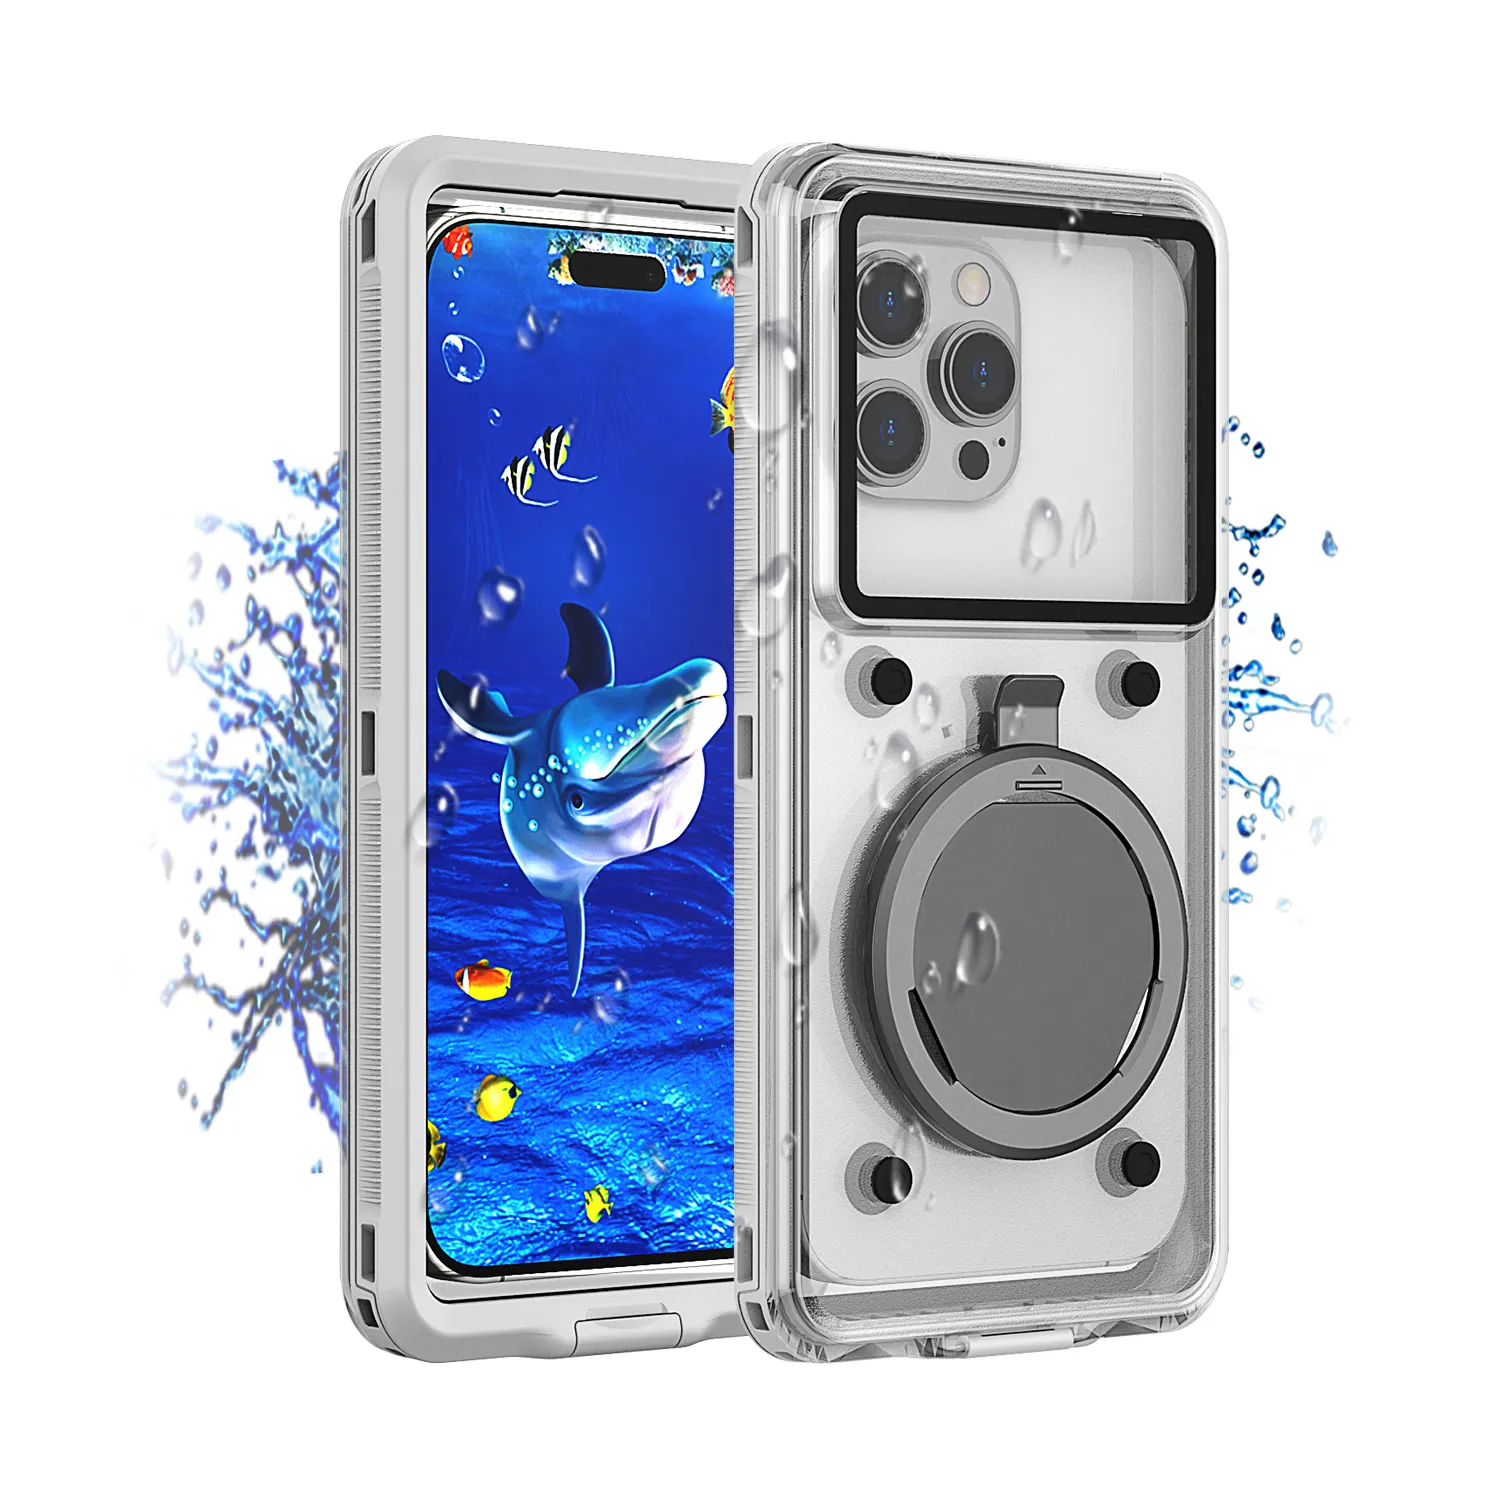 Universal Waterproof Mobile Phone Case For Phone Clear Pvc Sealed Underwater Cell Swimming Pouch Cover Custom Waterproof Bag